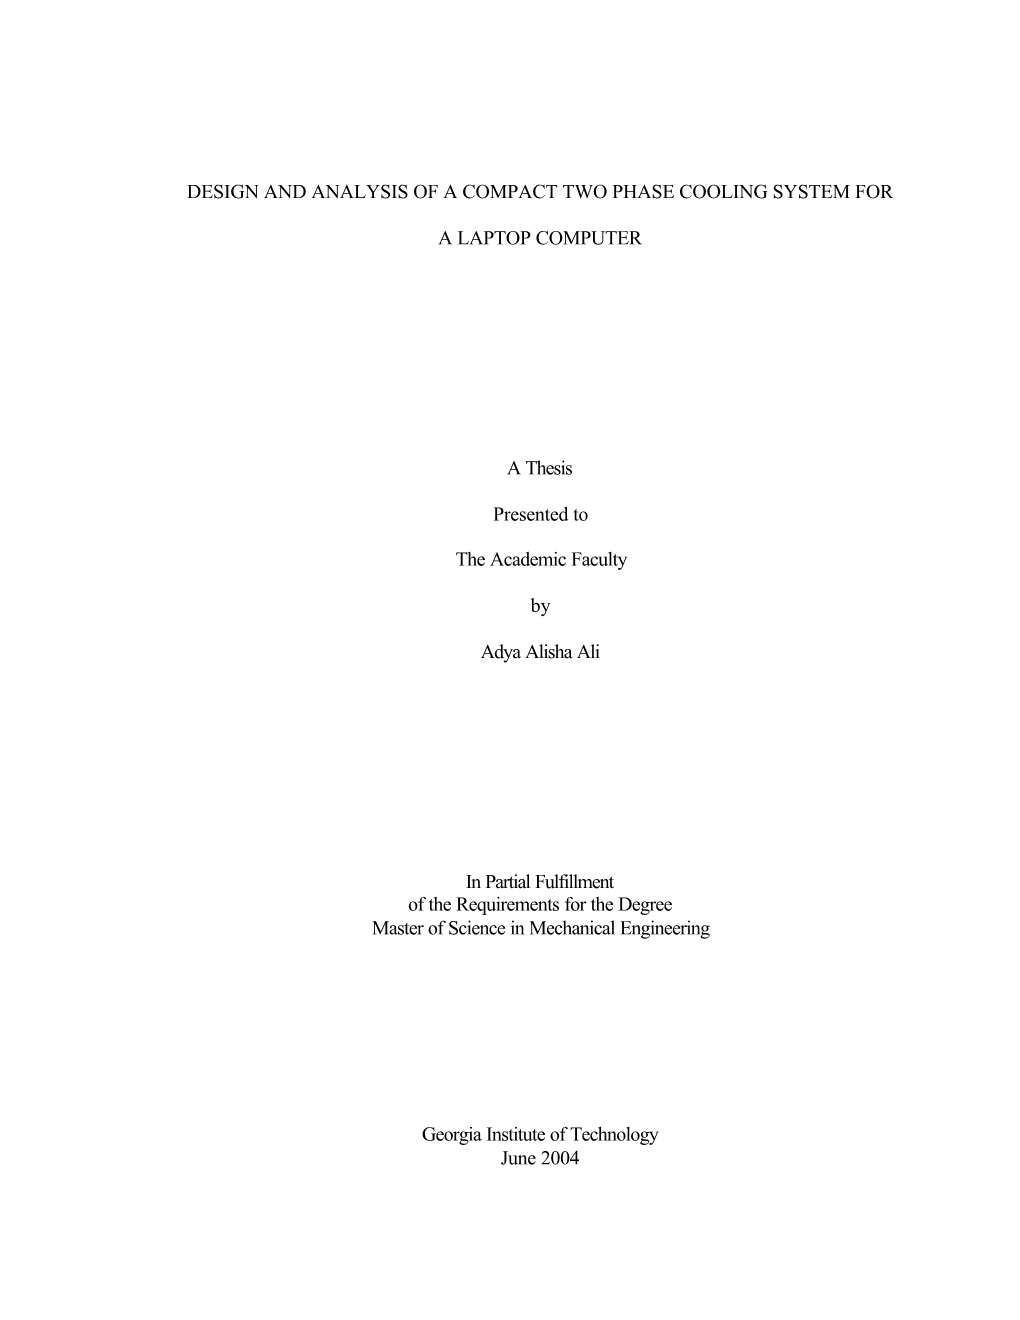 DESIGN and ANALYSIS of a COMPACT TWO PHASE COOLING SYSTEM for a LAPTOP COMPUTER a Thesis Presented to the Academic Faculty by Ad